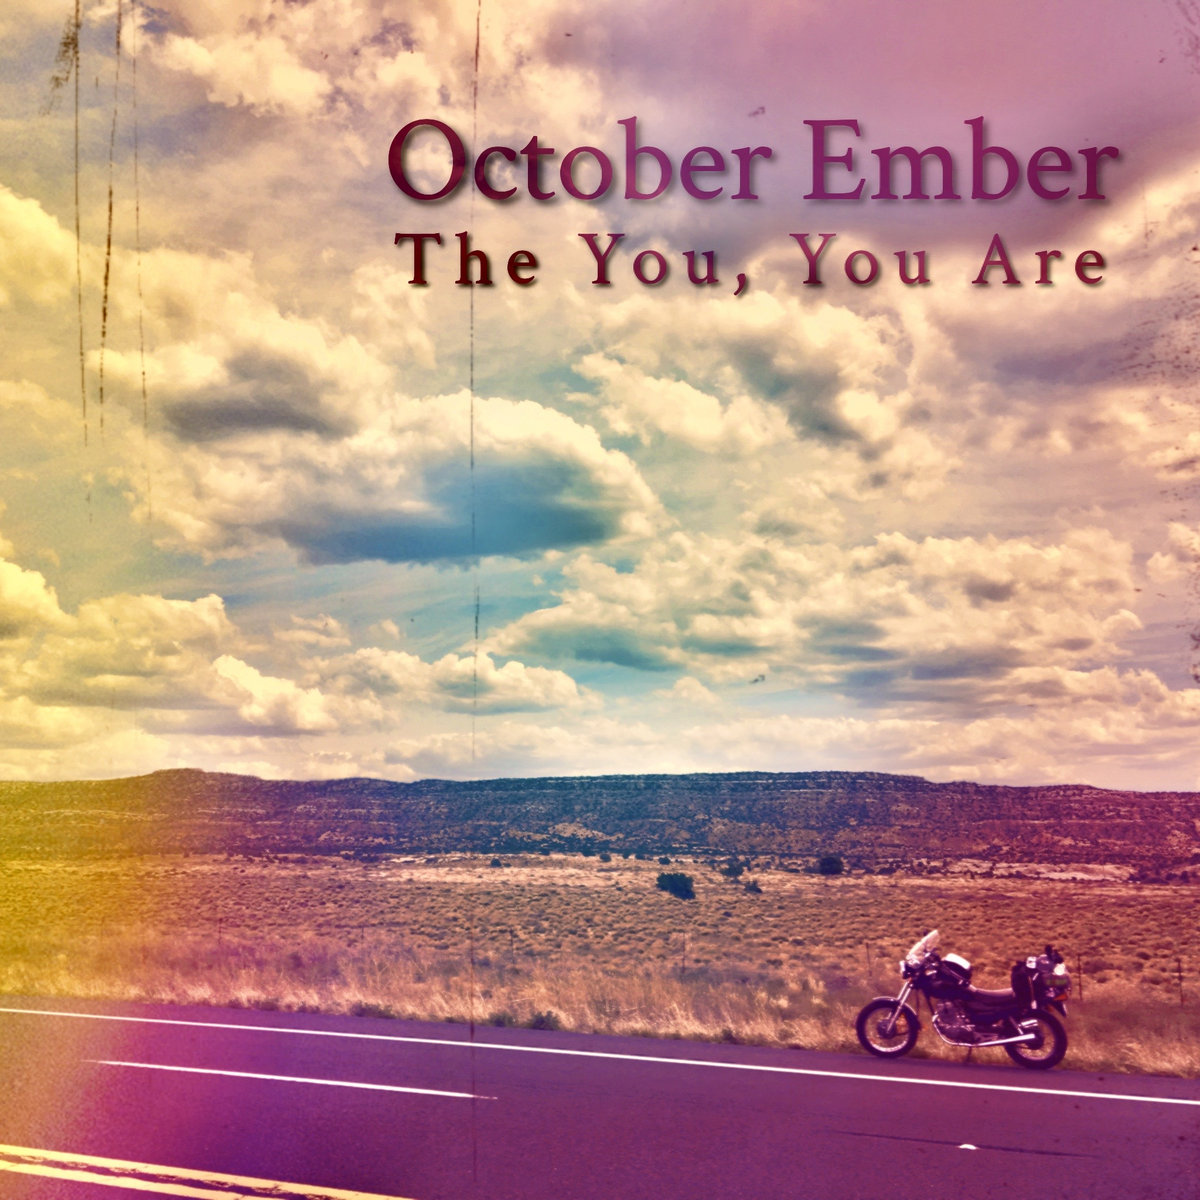 The You, You Are by October Ember